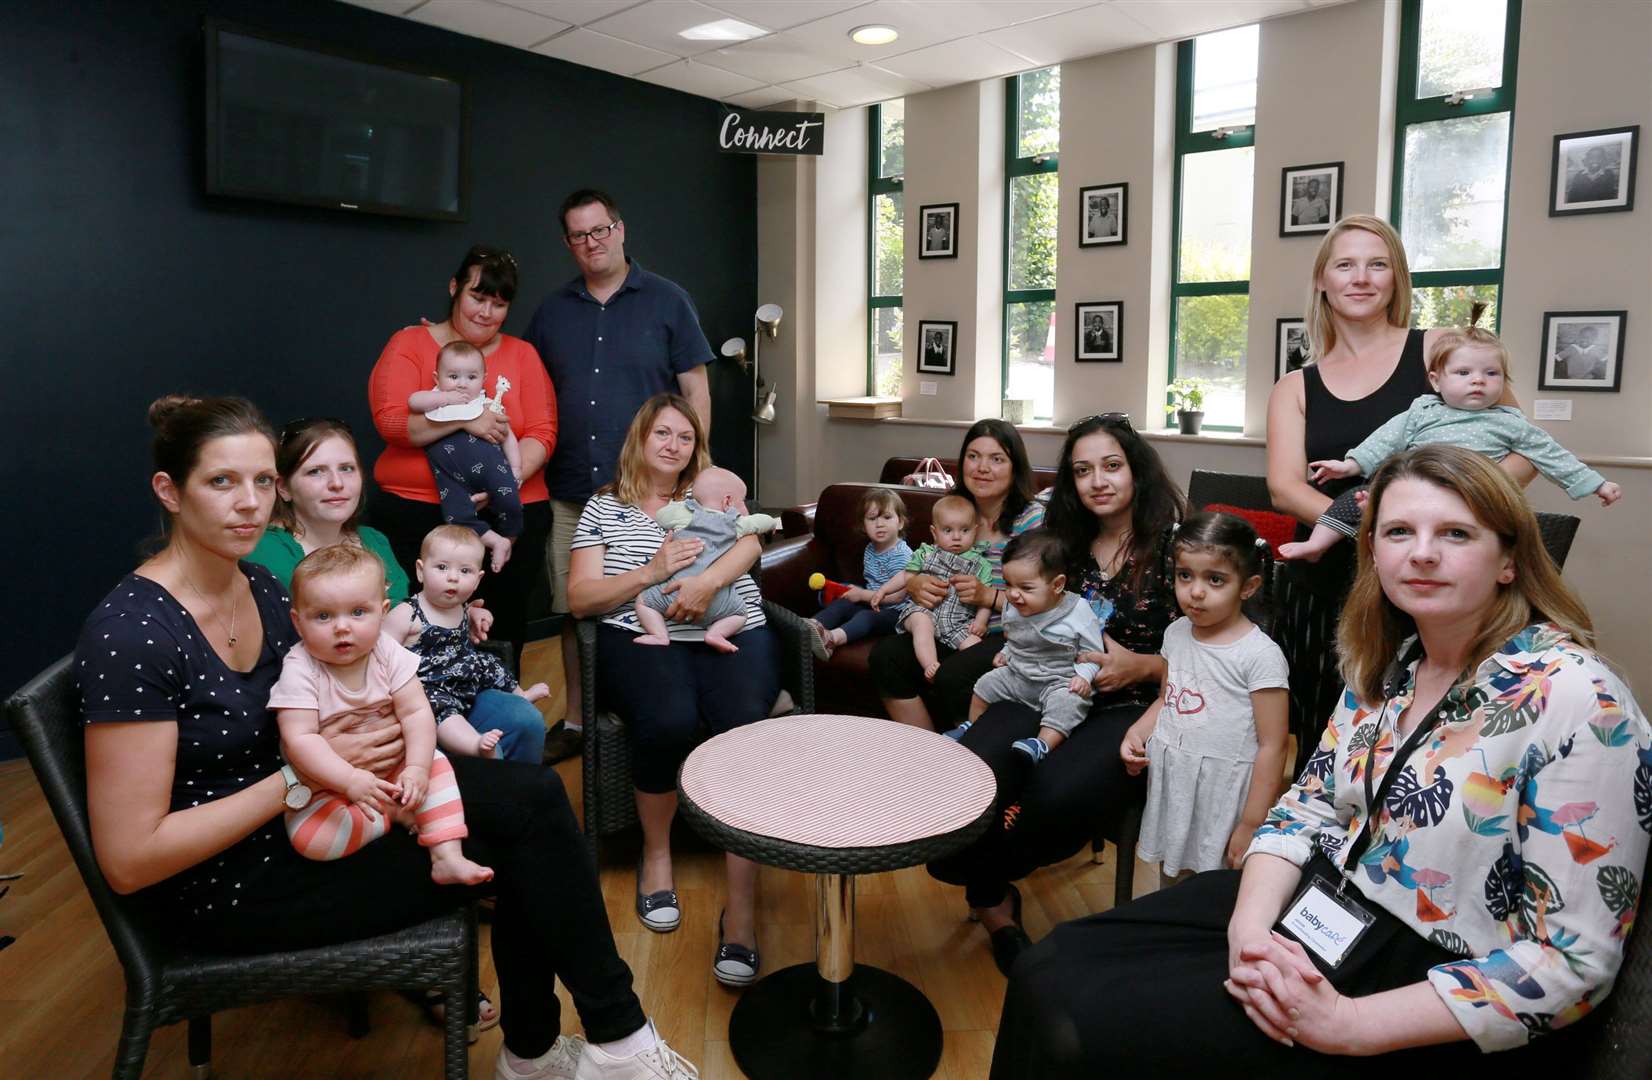 The café has helped more than 1,000 new parents